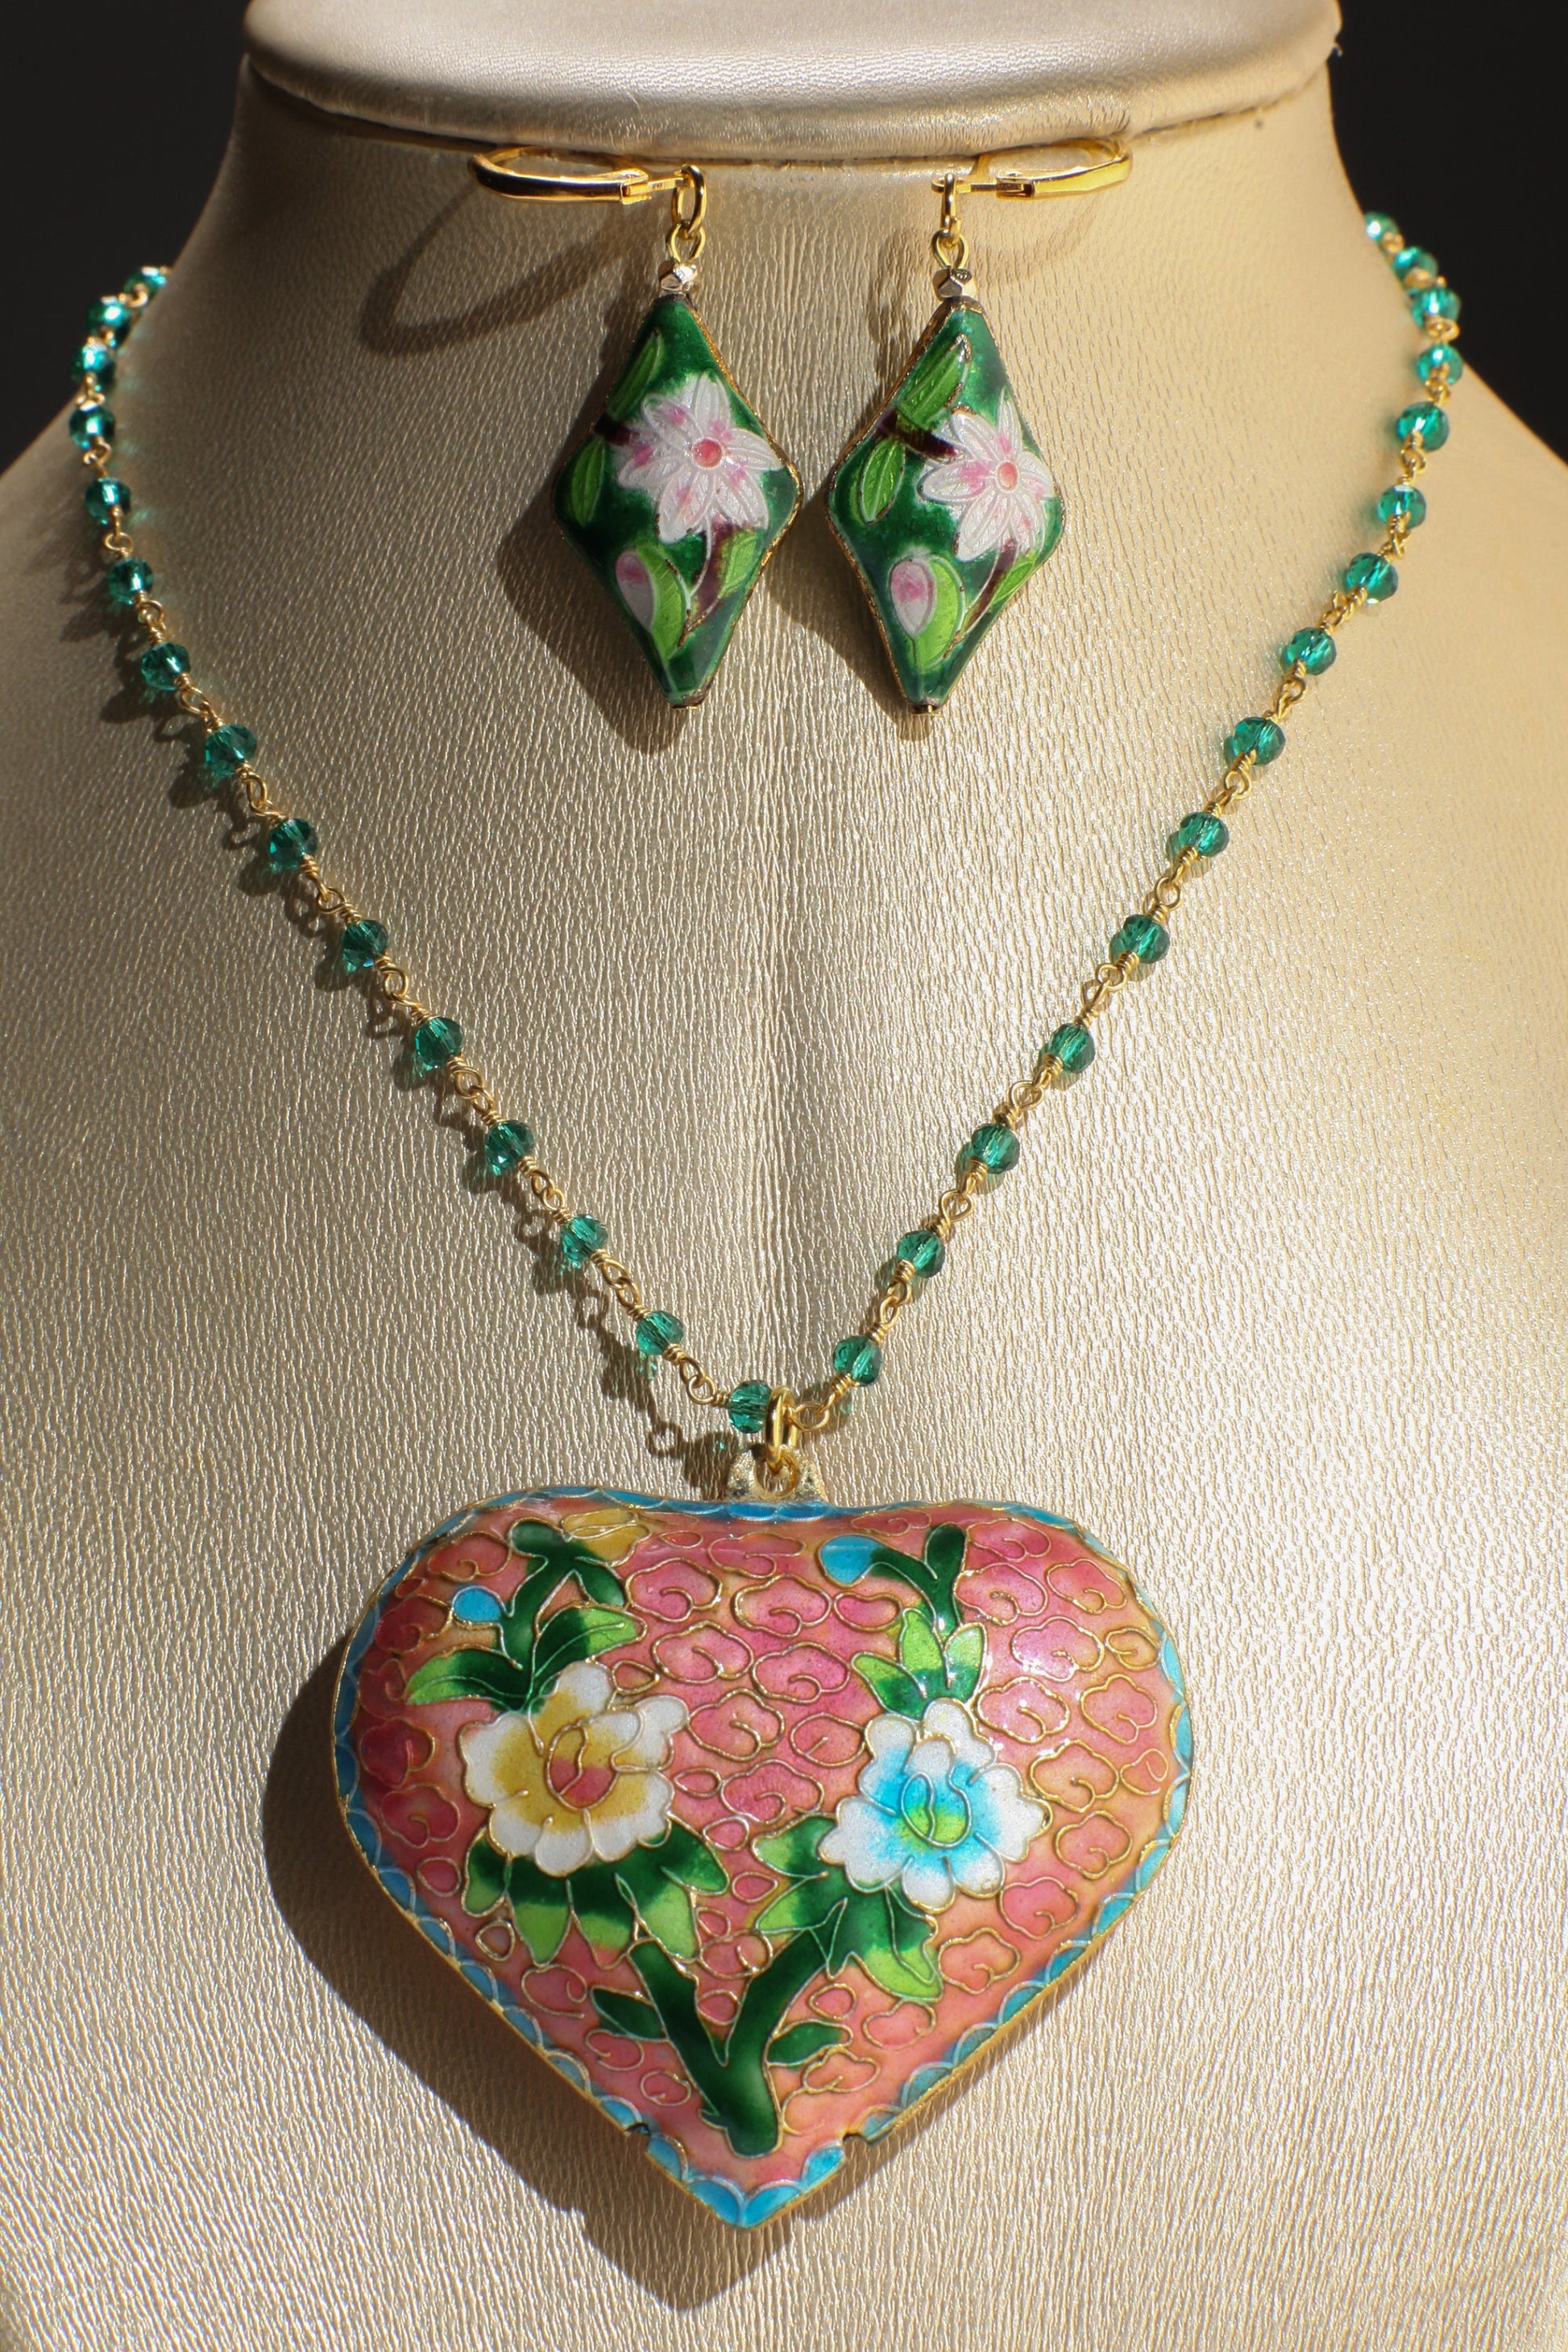 Traditional Cloisonné Pendant Vintage Floral Flowers Revisable Focal, Gold Plated Beaded Chain Necklace 20" matching Leverback Earrings set